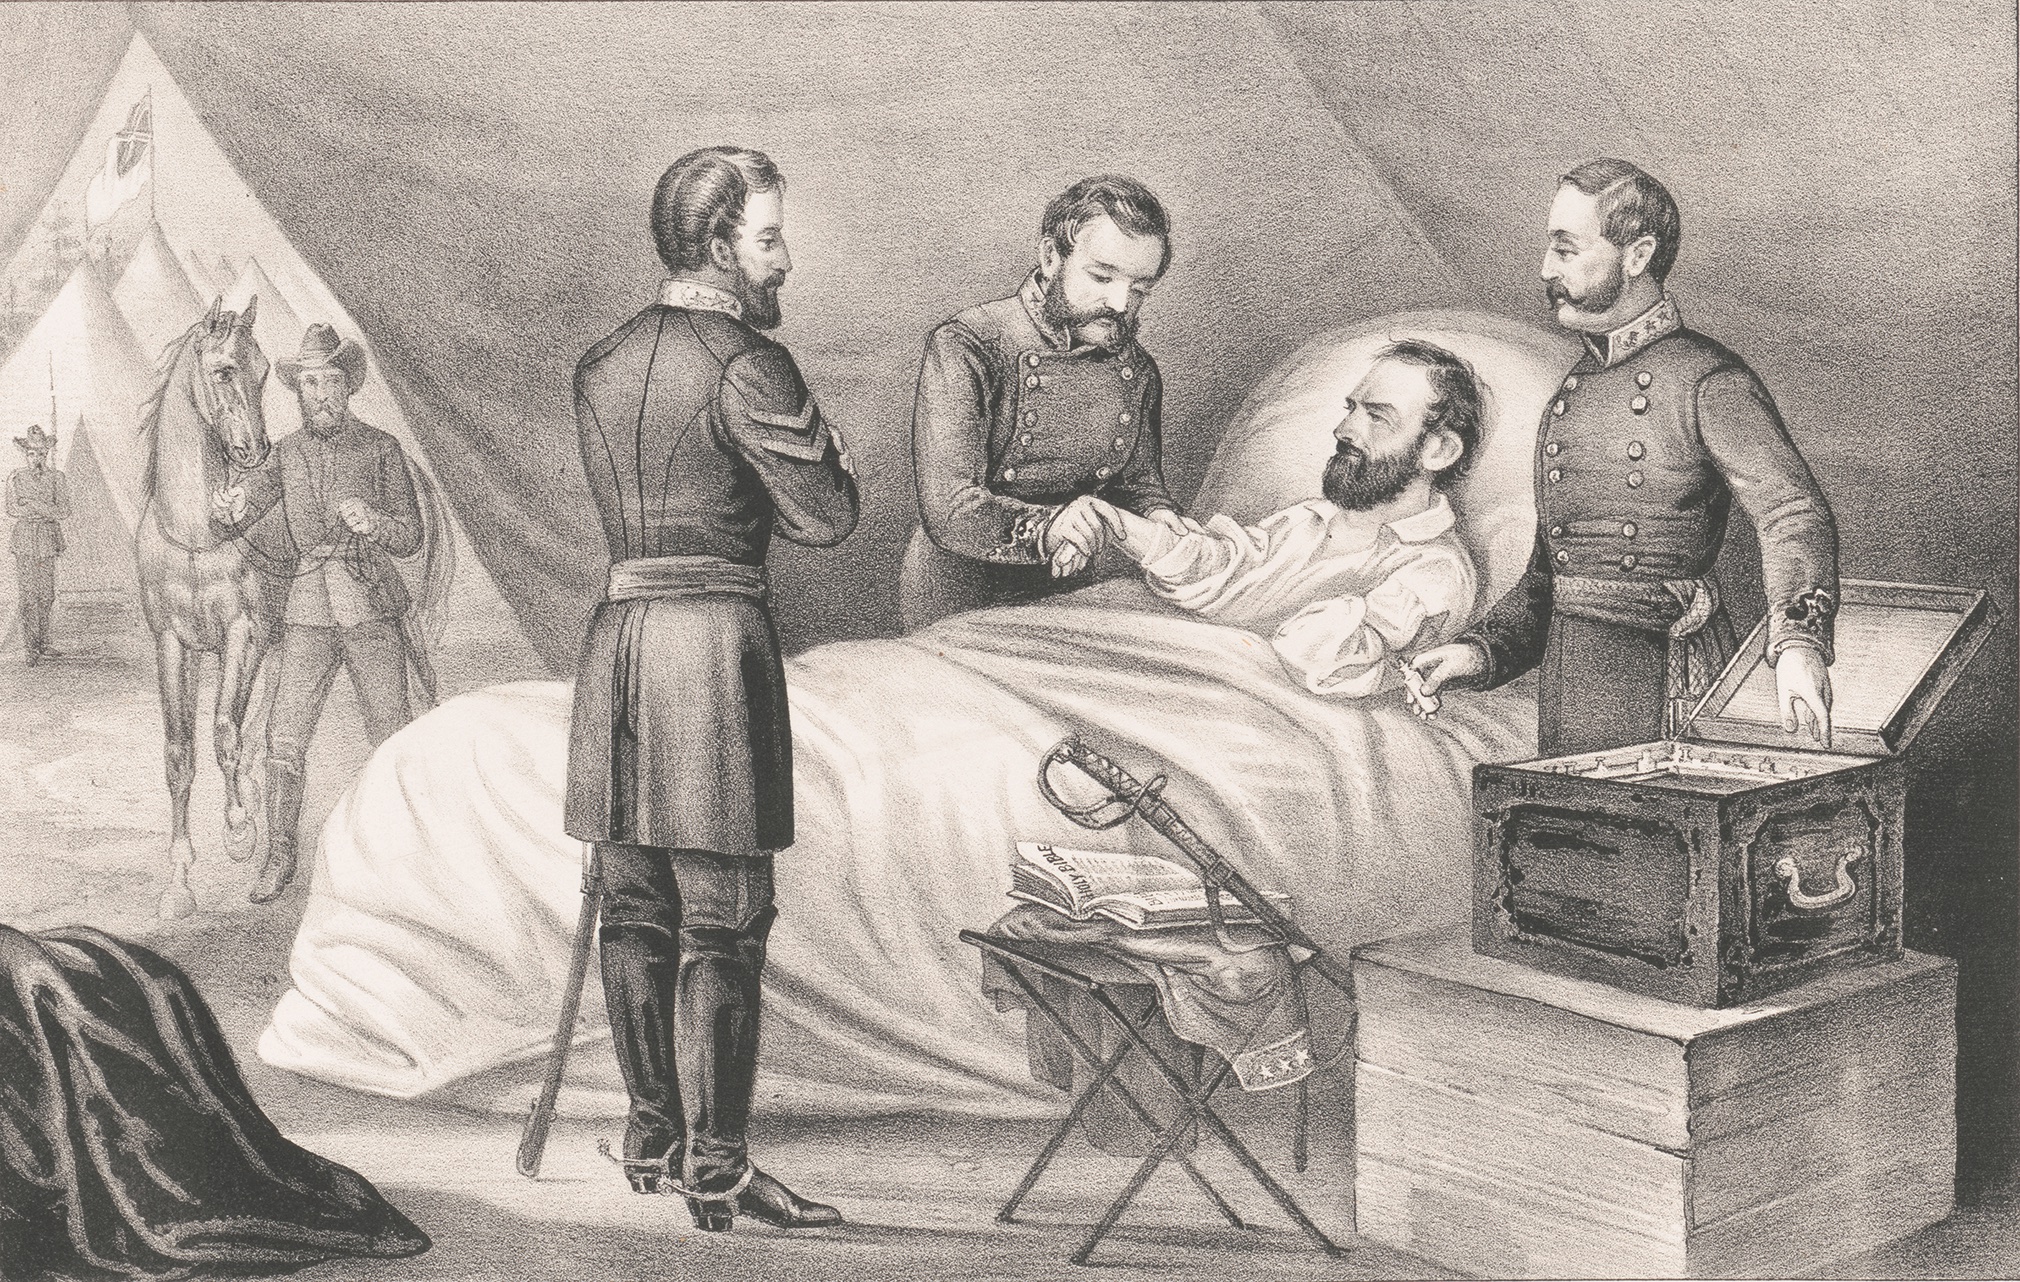 Doctors care for Stonewall Jackson at Guinea Station shortly after his left arm was amputated in May 1863. It is possible that Jackson was underdosed with anesthesia before the amputation. (Library of Congress)